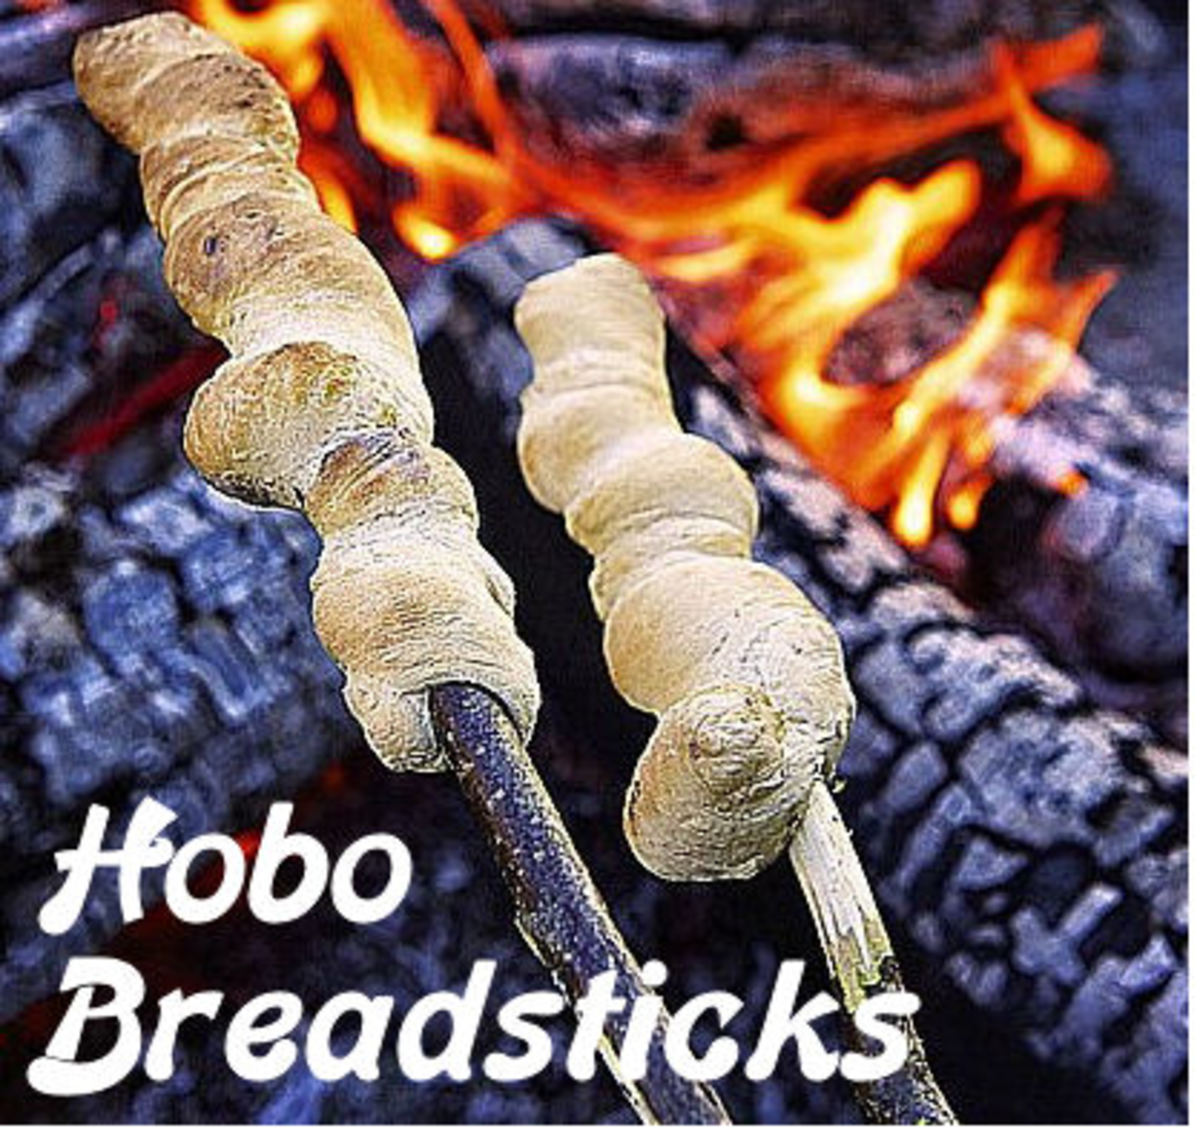 Toasting Hobo Breadsticks over a campfire